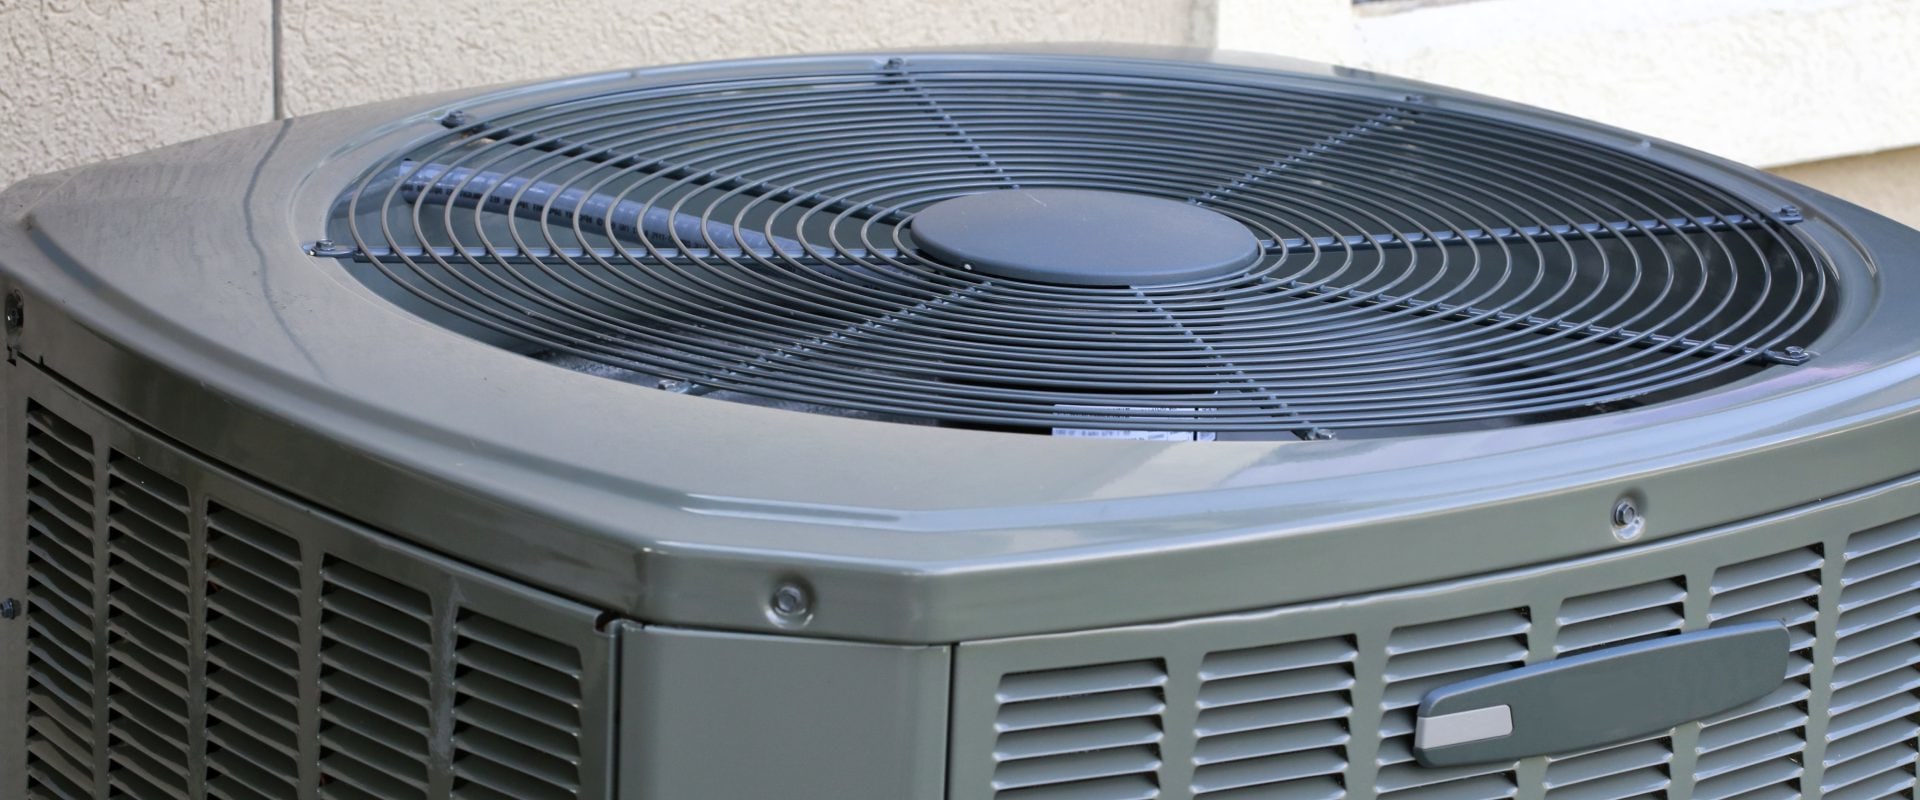 What's the Ideal Temperature for Your AC in Florida? - A Guide for Floridians